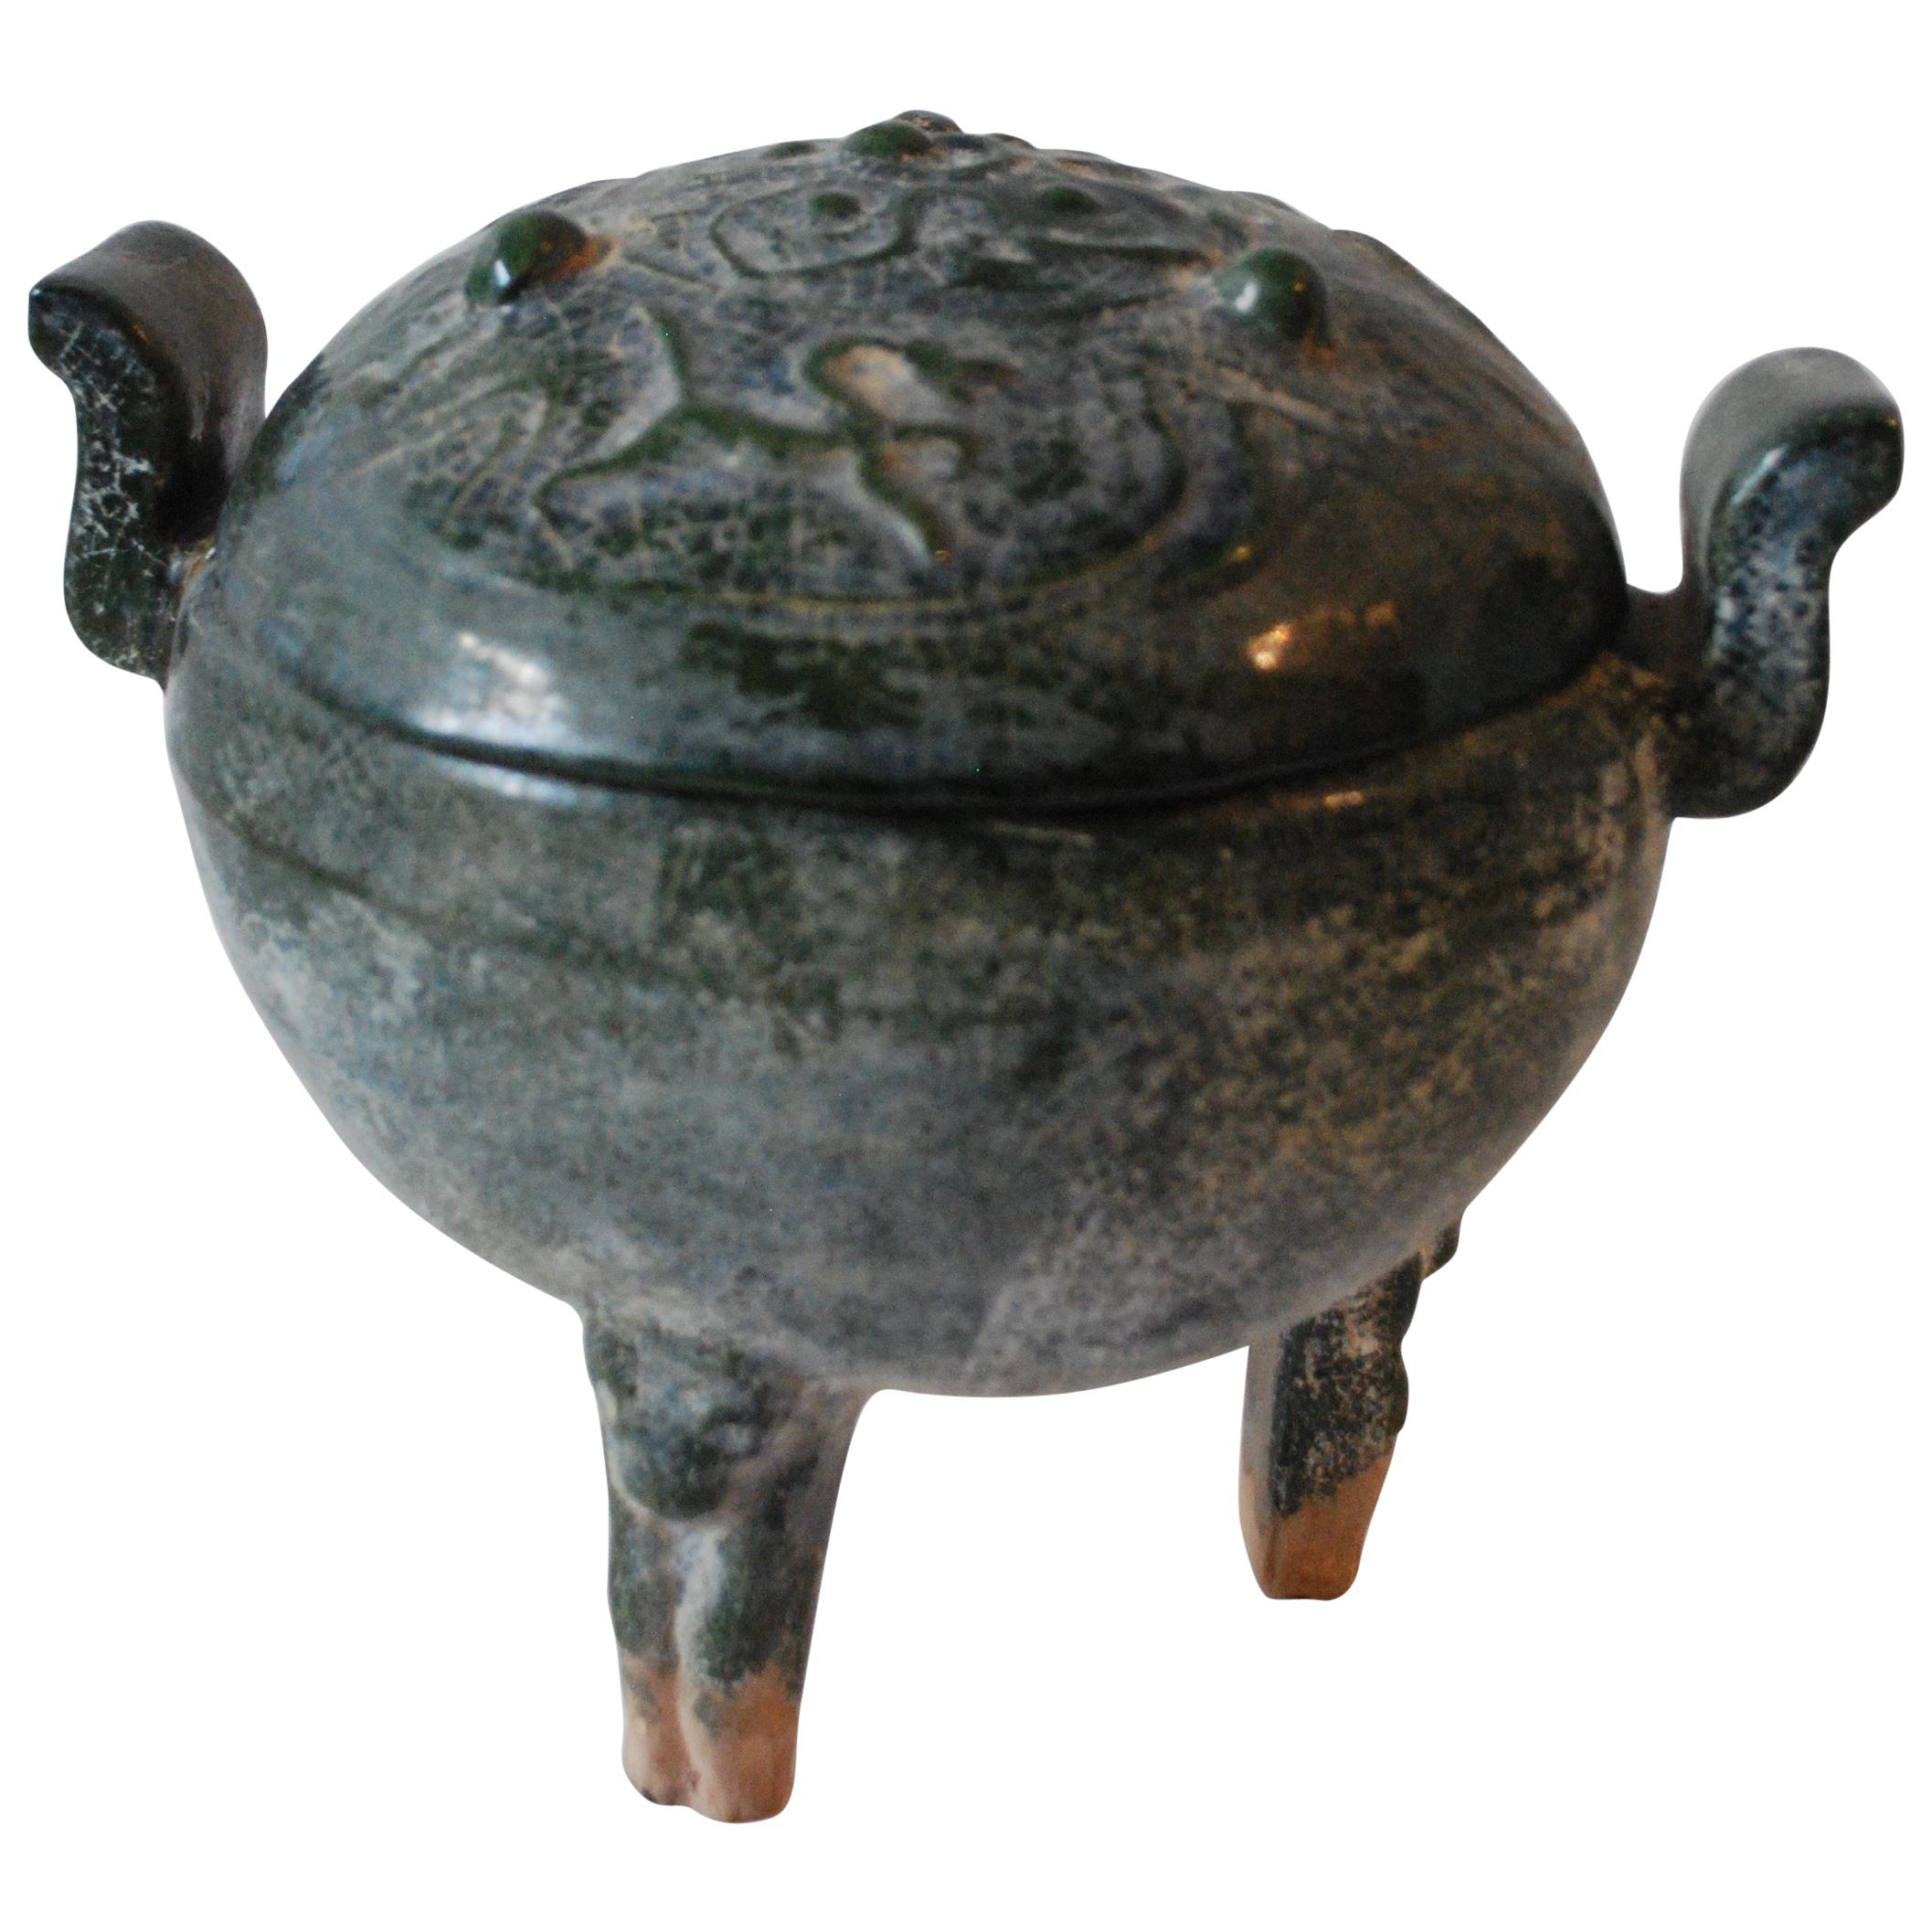 Early 20th Century Chinese Ding, Ritual Food Vessel